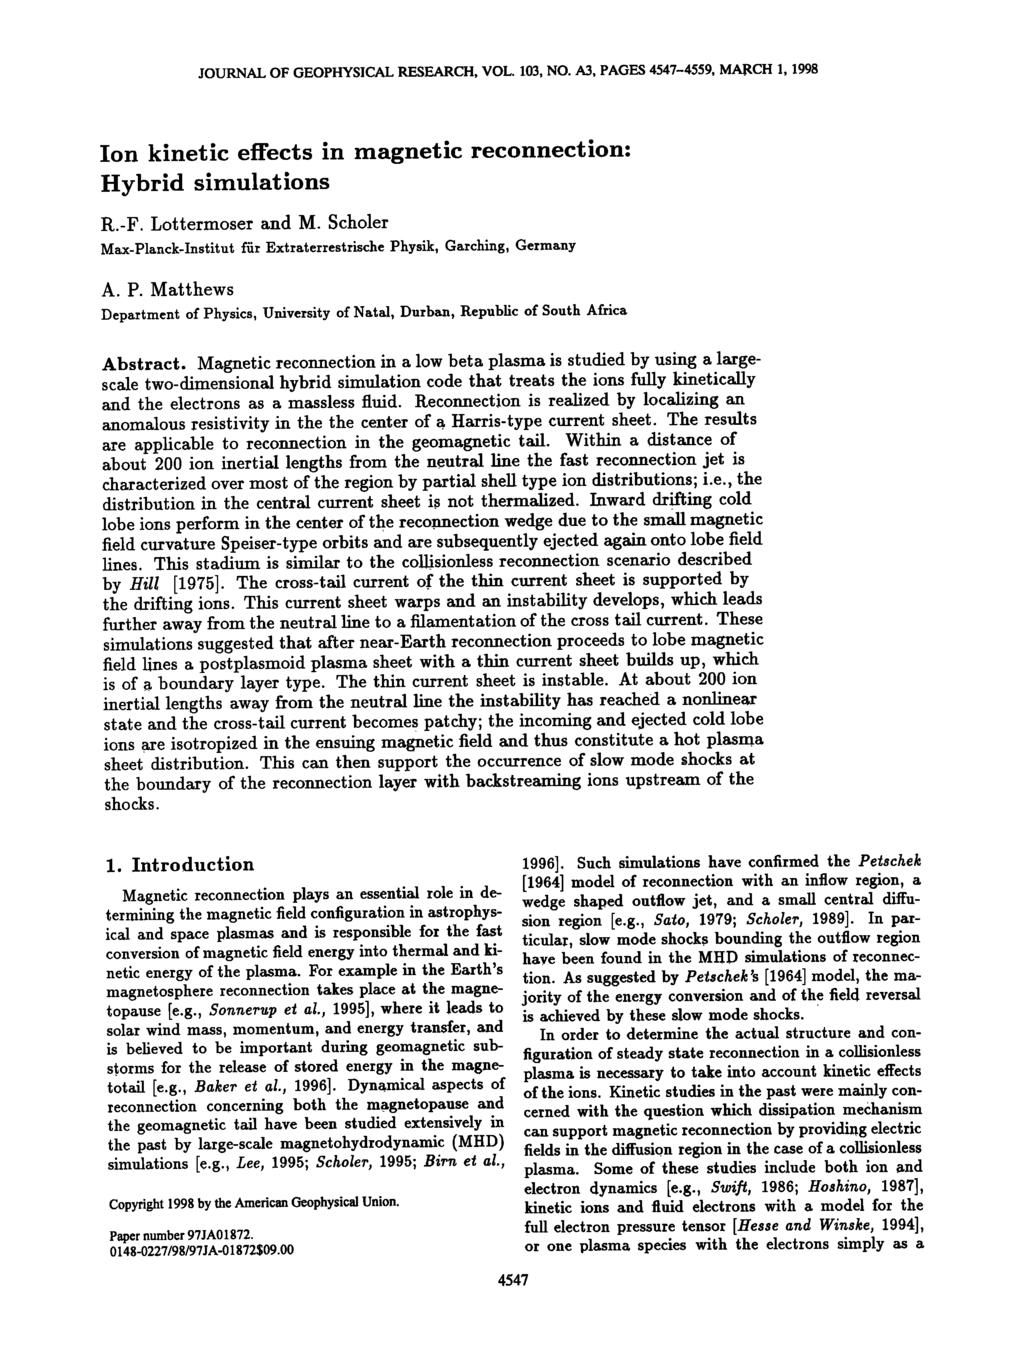 JOURNAL OF GEOPHYSCAL RESEARCH, VOL. 103, NO. A3, PAGES 4547-4559, MARCH 1, 1998 on kinetic effects in magnetic reconnection: Hybrid simulations R.-F. Loermoser and M.